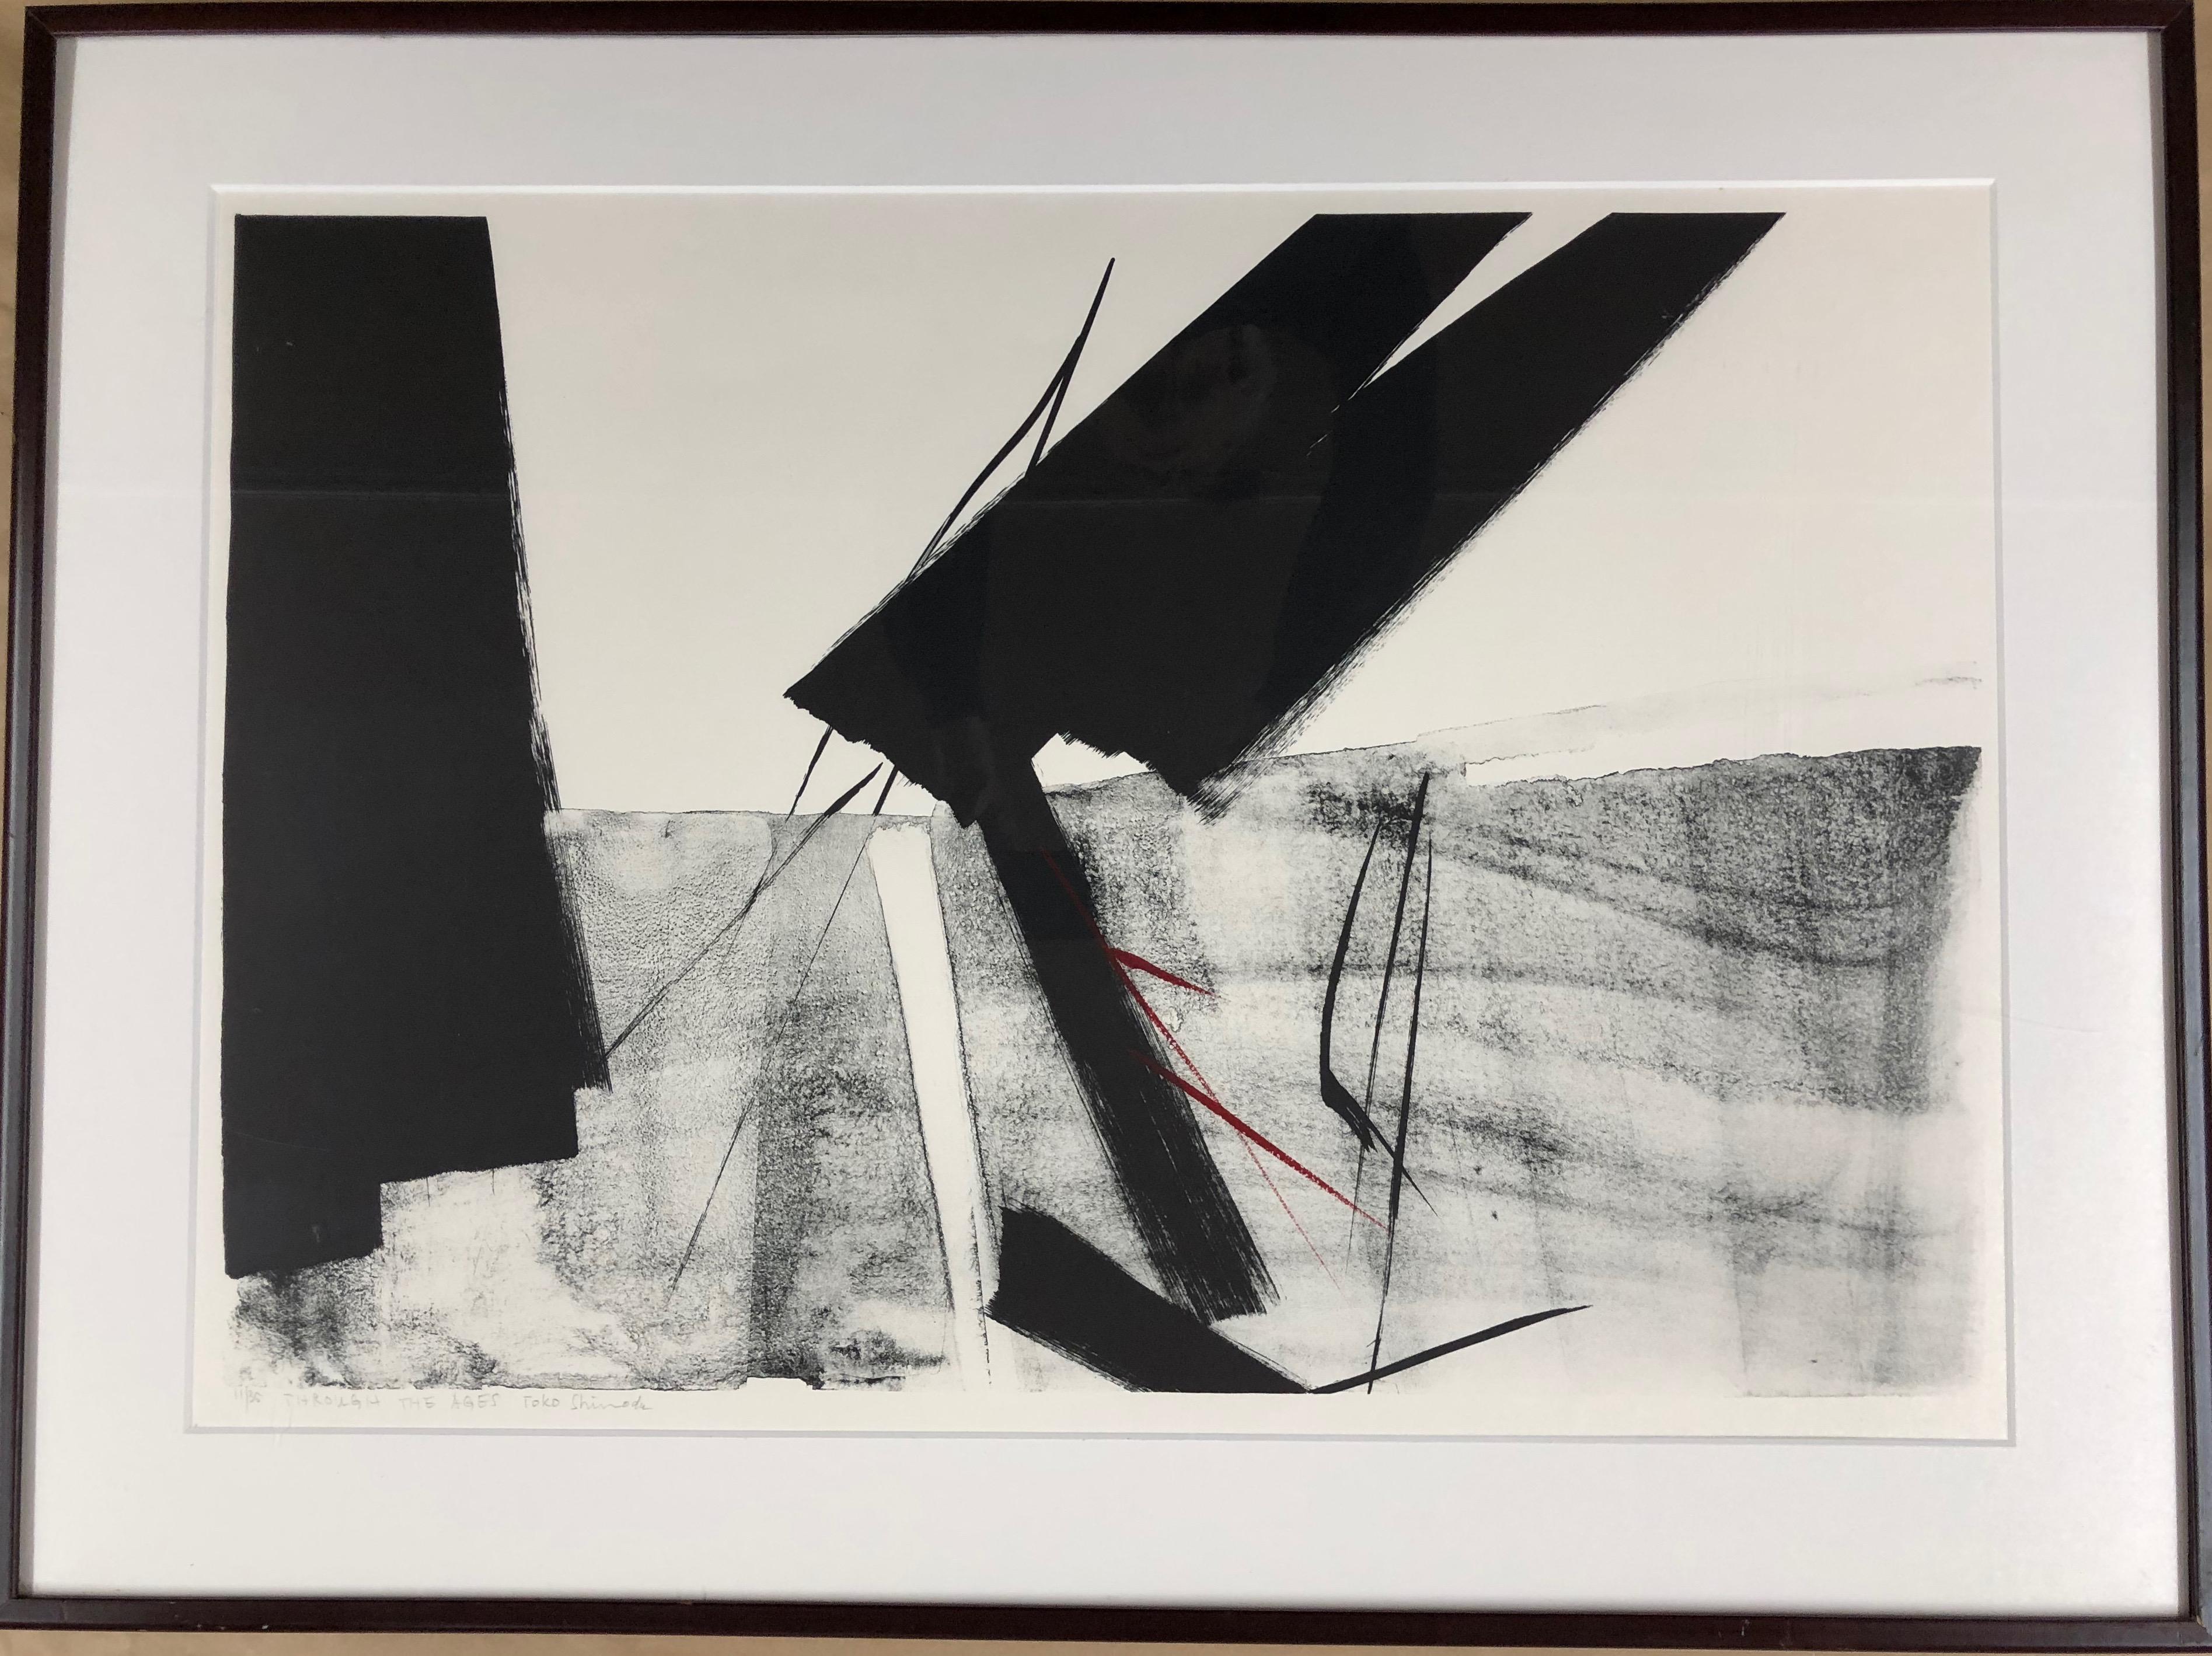 Through The Ages  by Toko Shinoda, black and white signed lithograph calligraphy